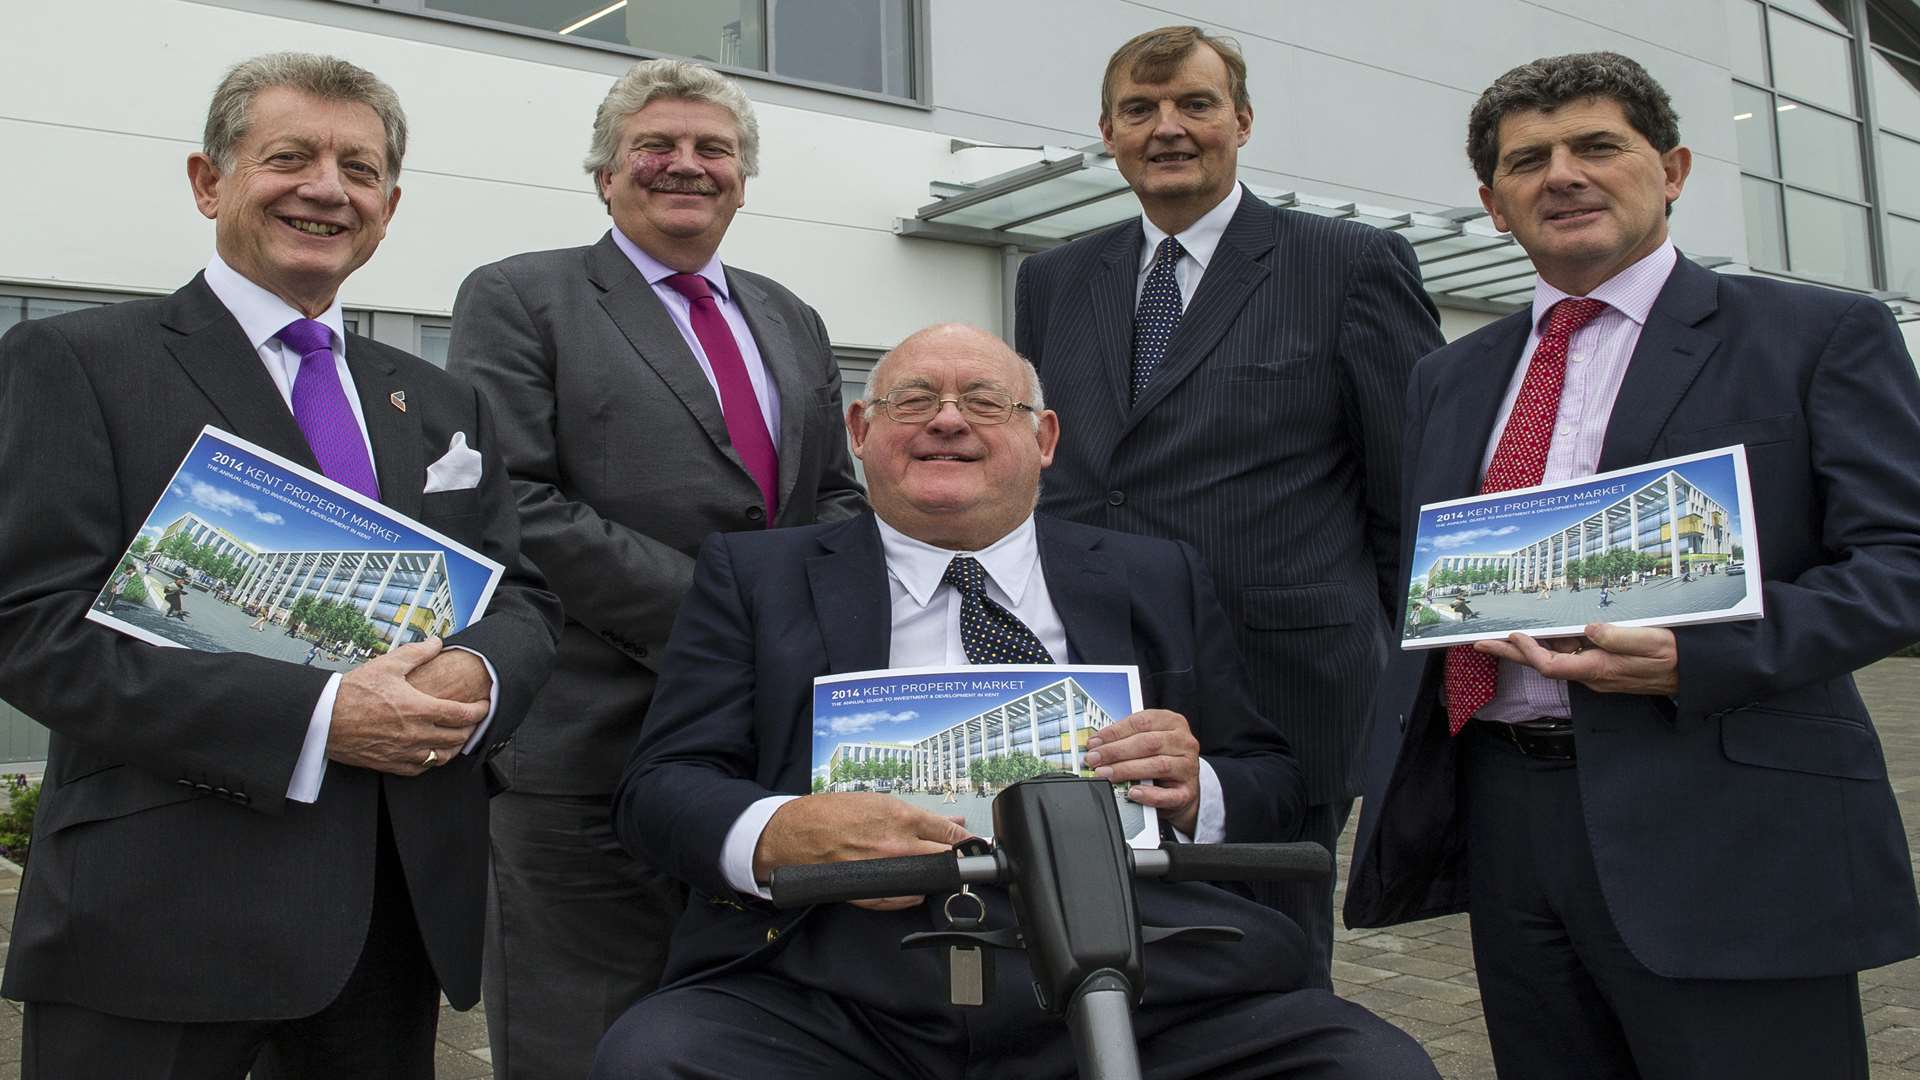 The 13th Kent Property Market Report was launched by, from left, Ron Roser, chairman of Caxtons, Cllr Mark Dance, Michael Cassidy CBE, chairman-designate of Ebbsfleet Garden City UDC, KCC leader Paul Carter KCC and Paul Wookey, chief executive of Locate in Kent